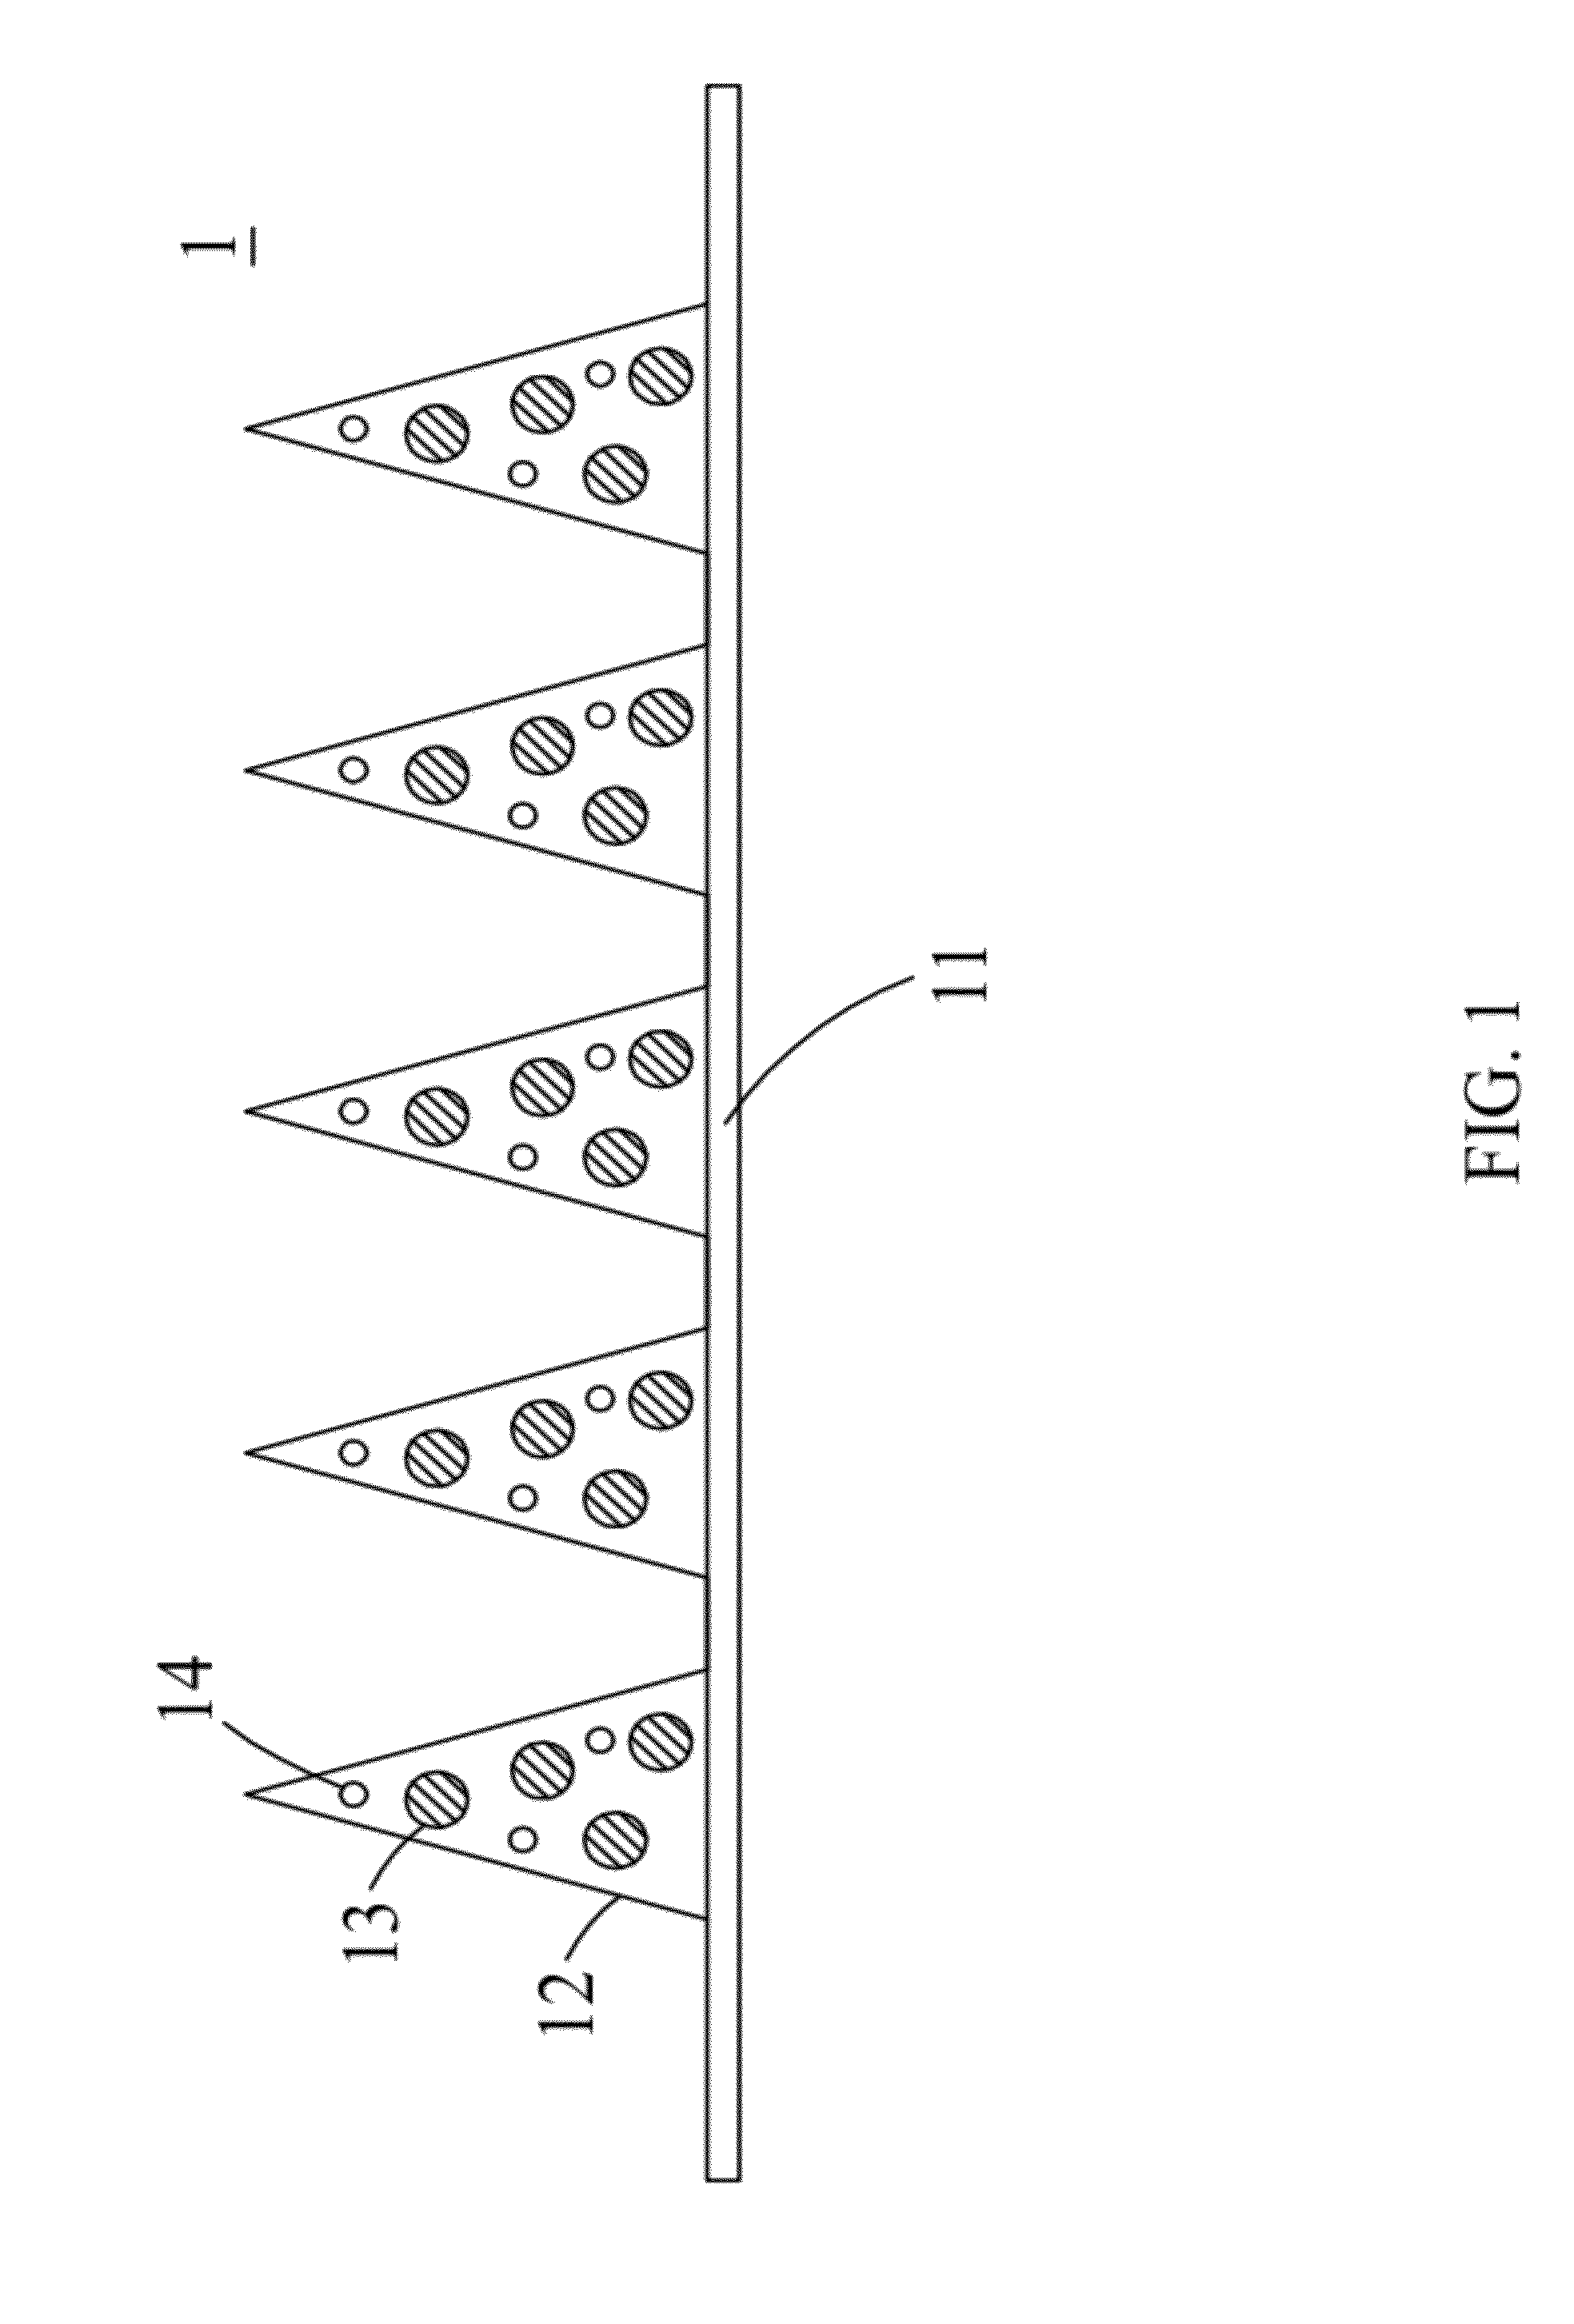 Transdermal drug delivery patch and method of controlling drug release of the same by near-ir